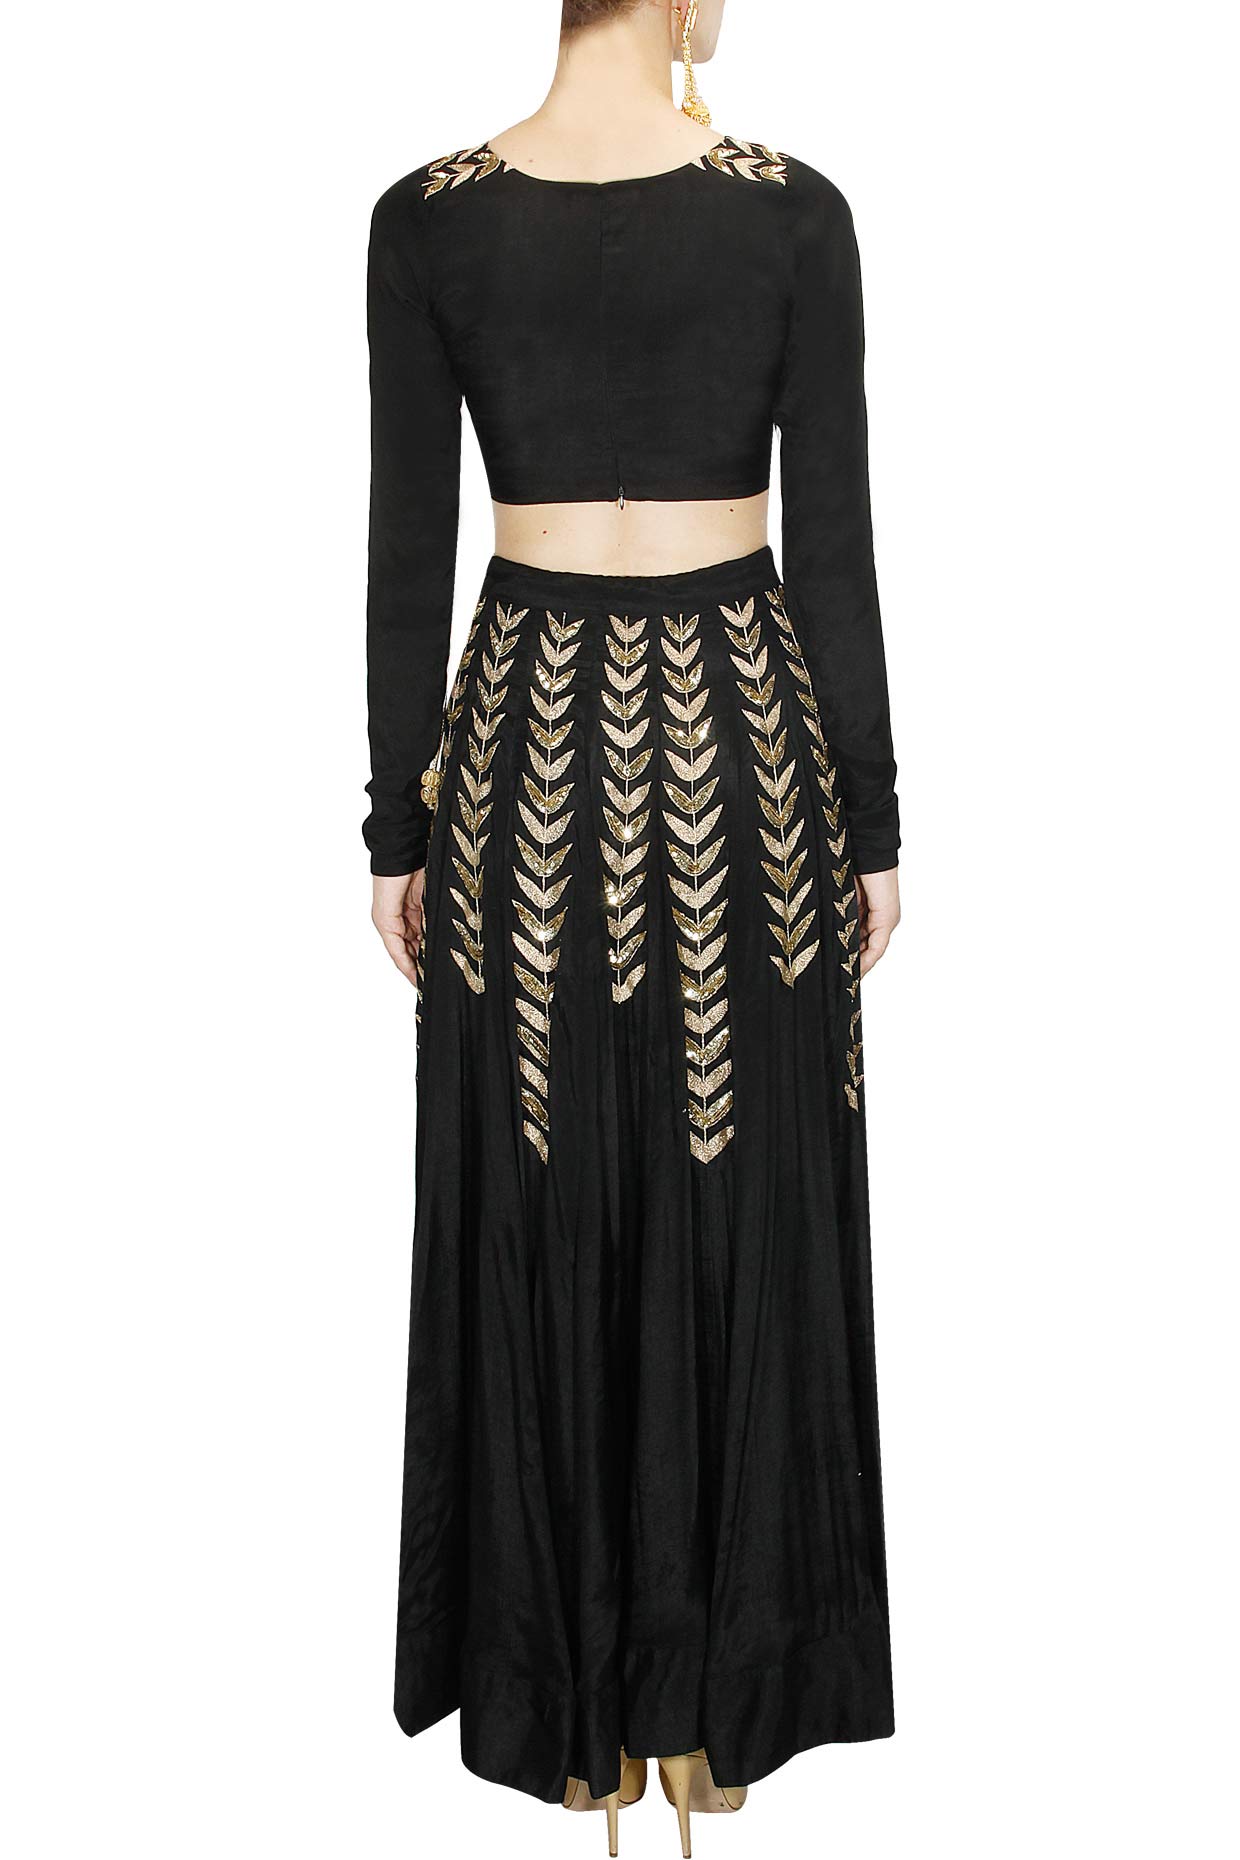 Buy URS Red Net Lehenga With Black Keyhole Crop Top at Amazon.in